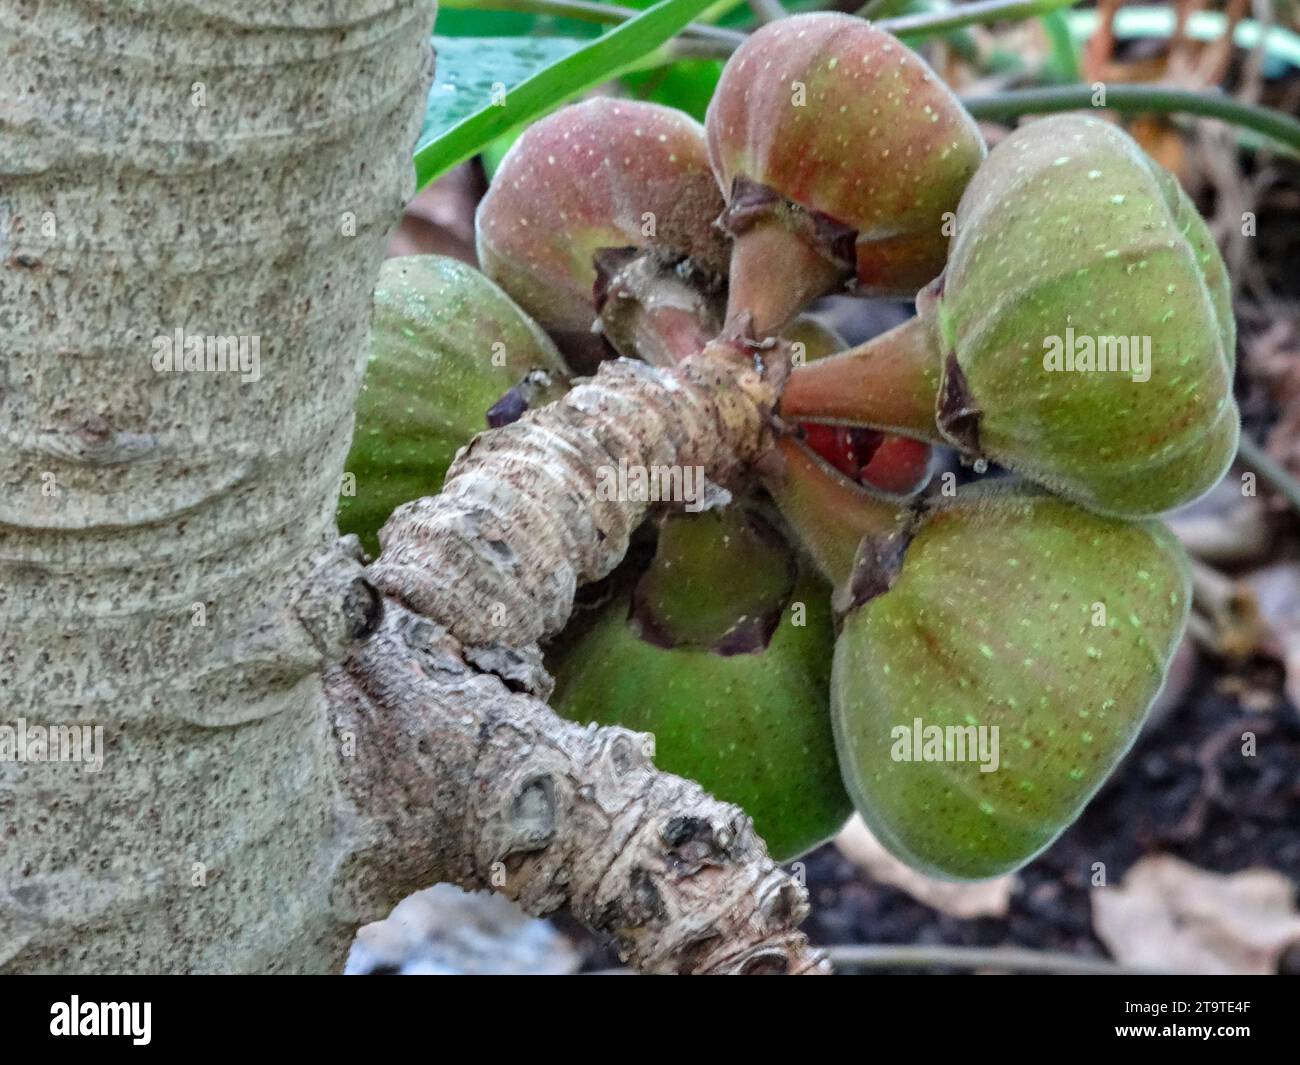 Natural close up exotic fruit portrait of the prolifically fruiting Ficus Auriculata, (the Roxburgh fig, Elephant ear tree). Stock Photo